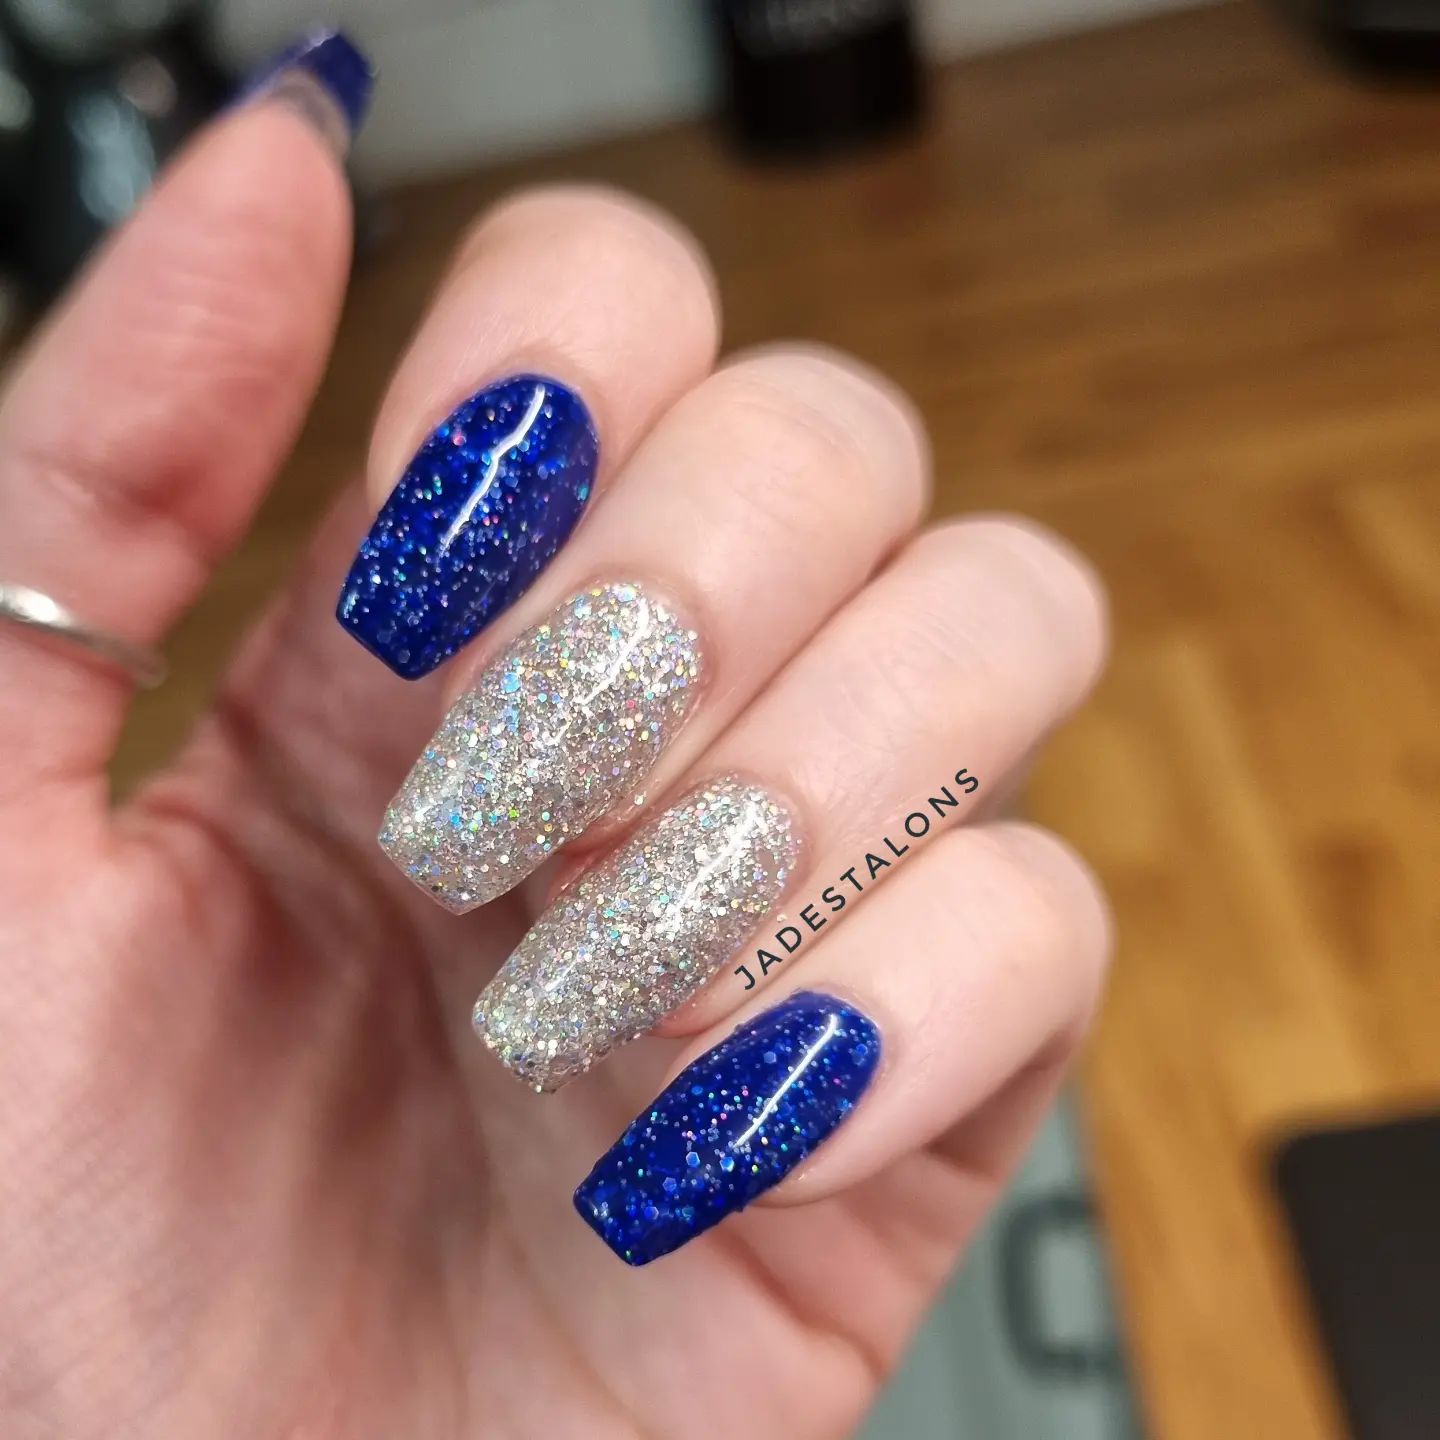 Hanna Beth Merjos Navy Blue, Silver Beads, Glitter Nails | Steal Her Style